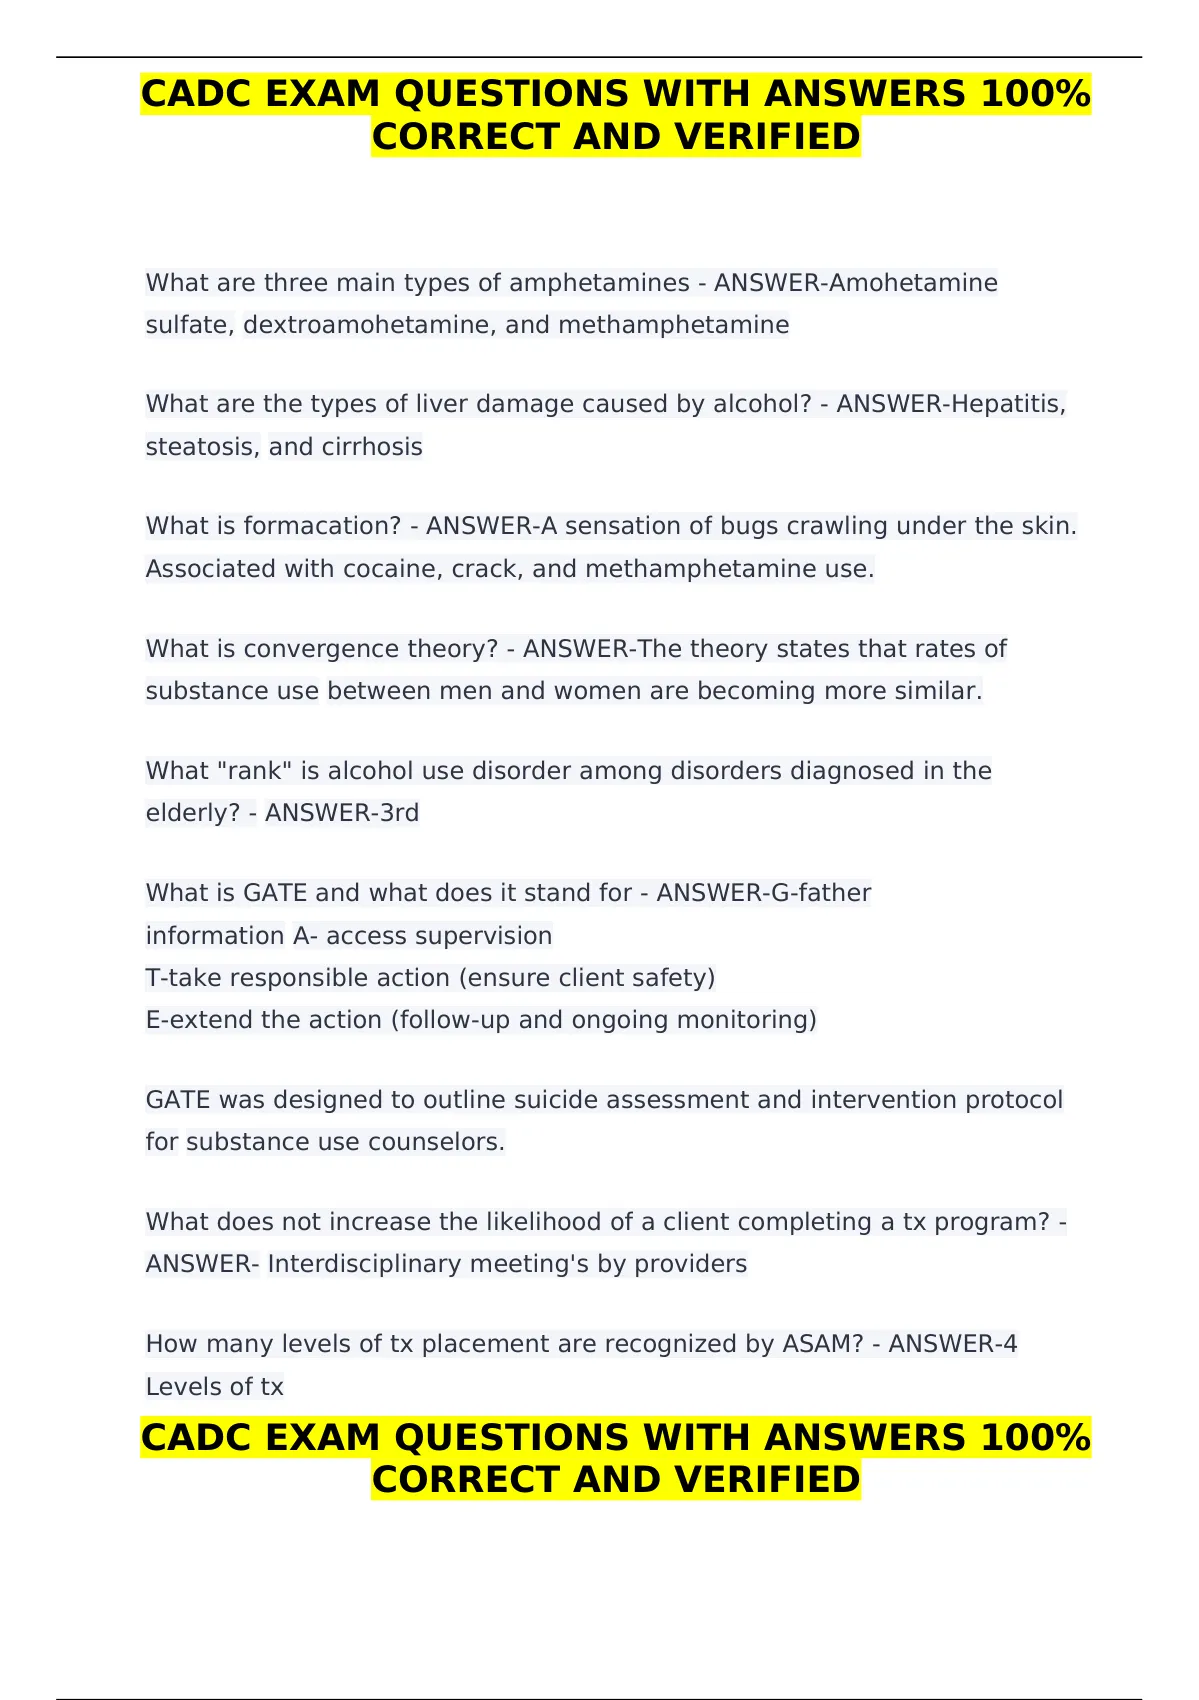 CADC EXAM QUESTIONS WITH ANSWERS 100% CORRECT AND VERIFIED CADC E